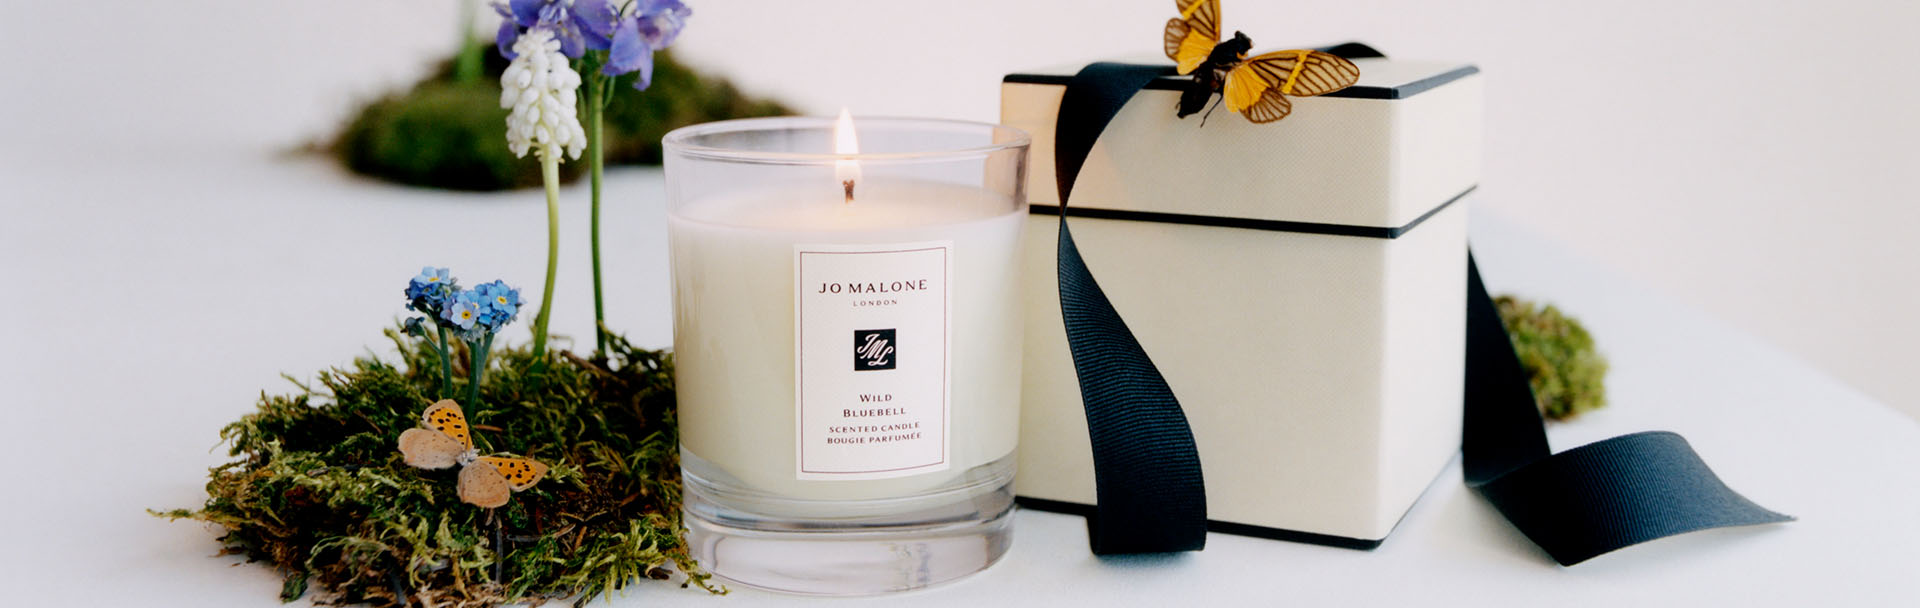 image of a cologne in a jo malone cream & black box with candles on a marble table with flowers beside 